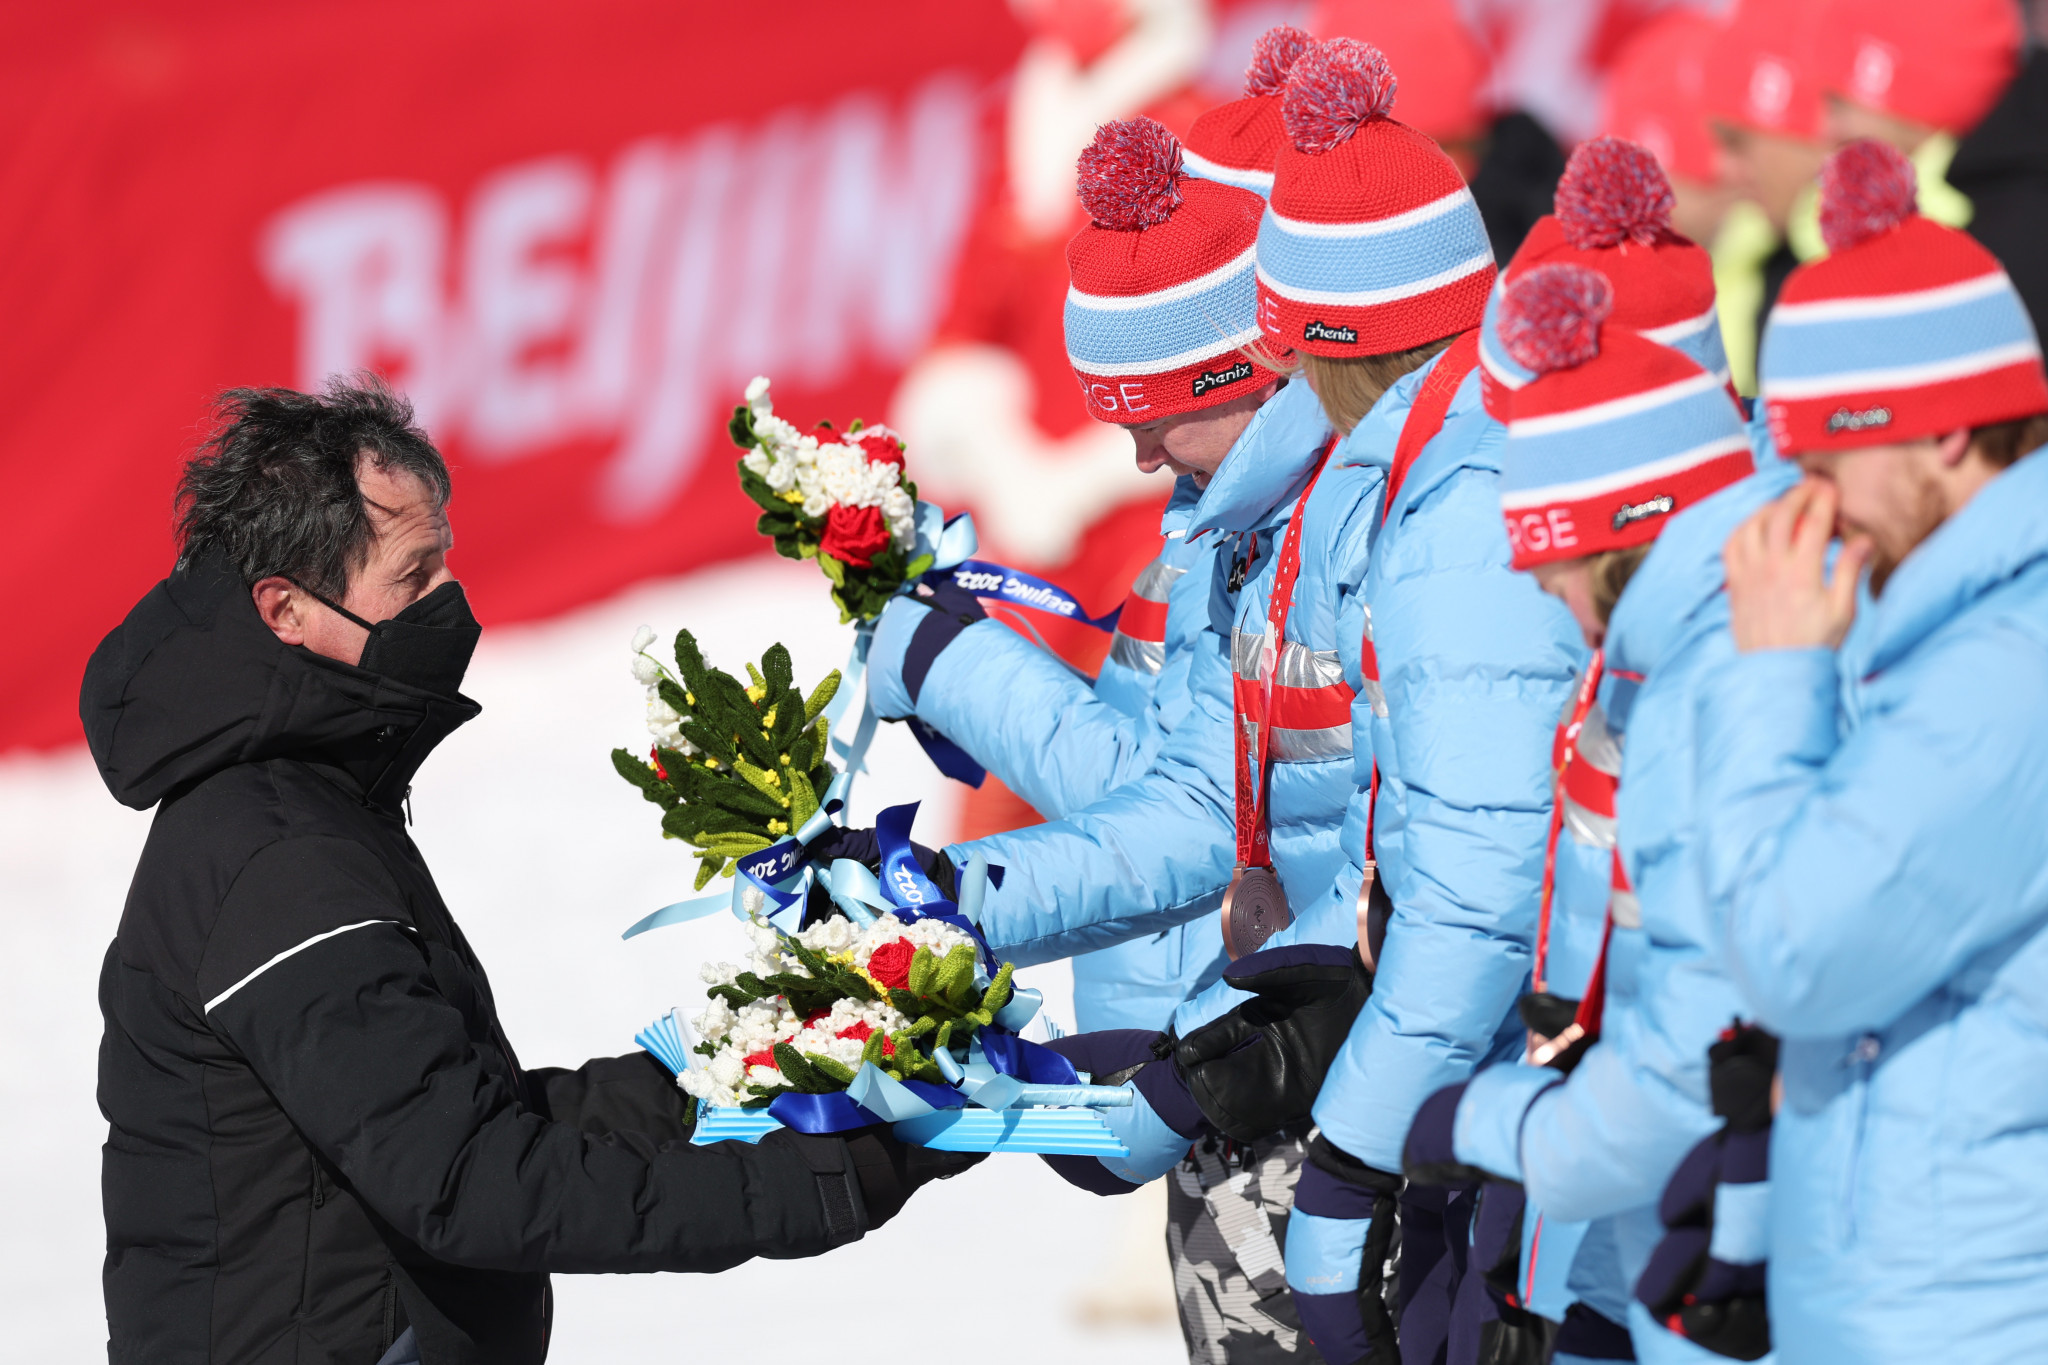 Michel Vion stated that Russian and Belarusian athletes could be welcomed back to FIS competitions by the end of 2022 ©Getty Images